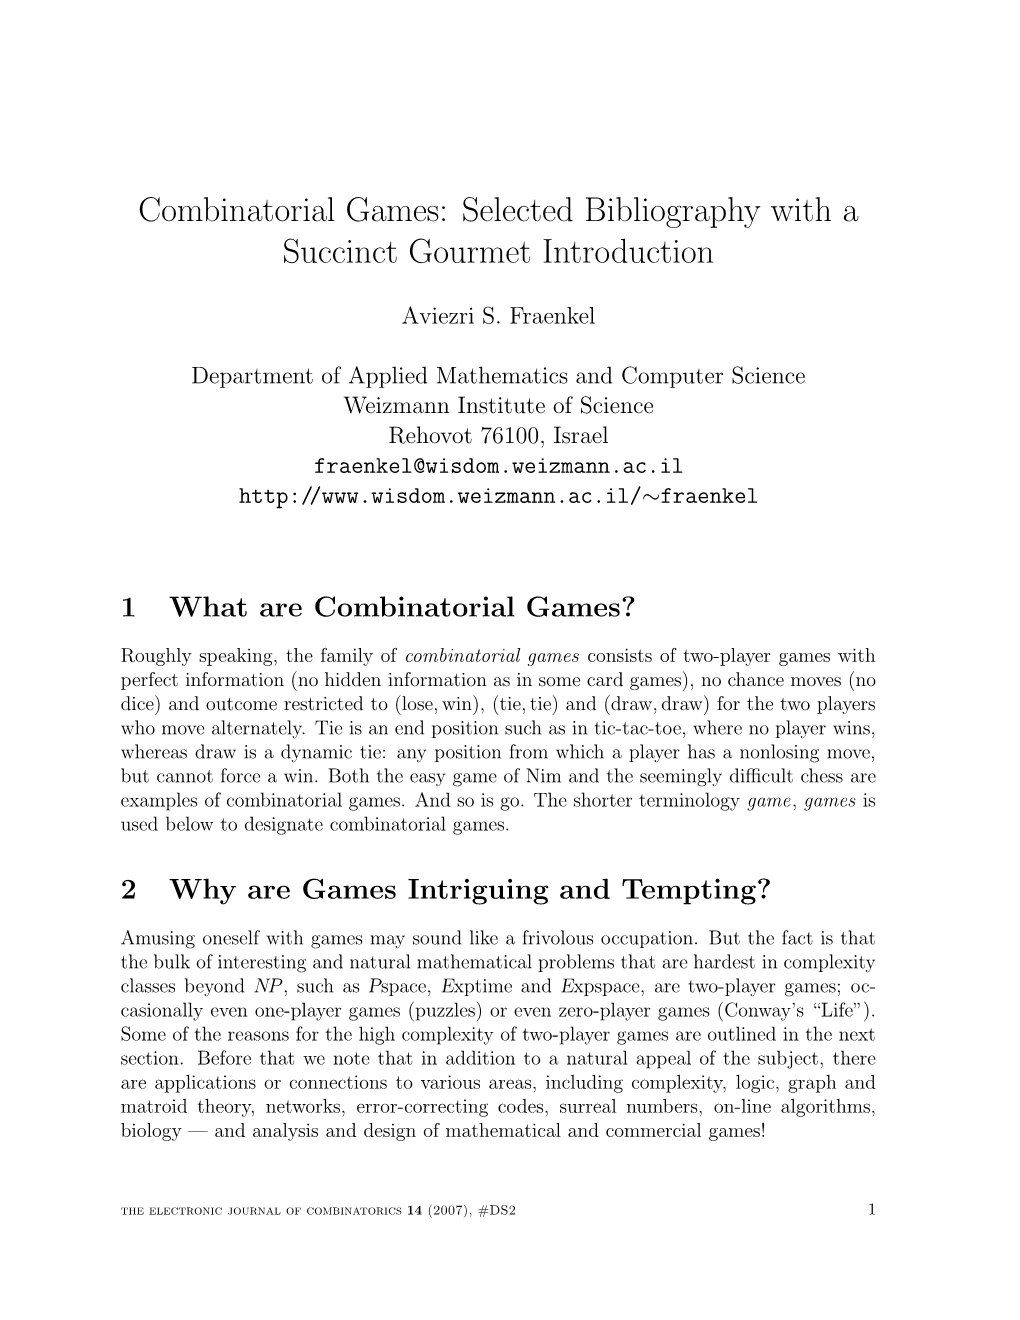 Combinatorial Games: Selected Bibliography with a Succinct Gourmet Introduction